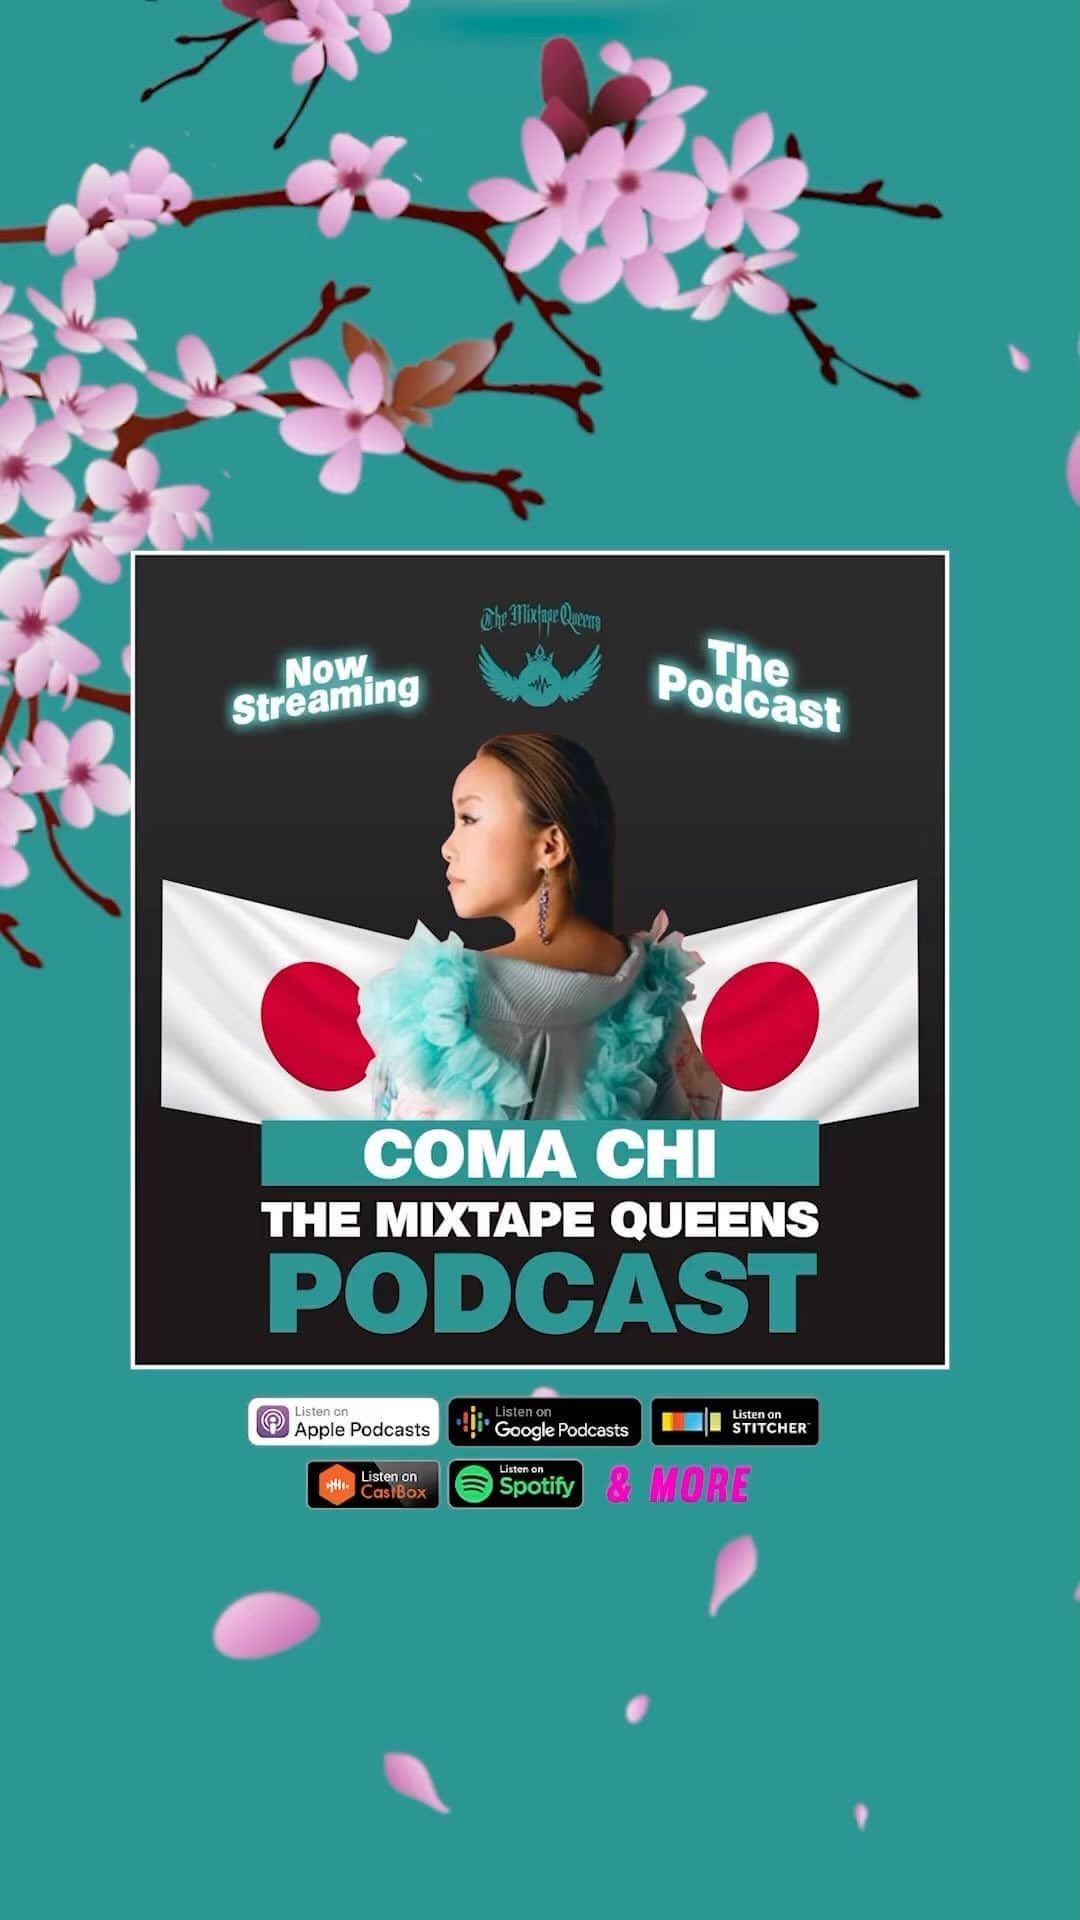 COMA-CHIのインスタグラム：「New episode of The Mixtape Queens Podcast is streaming on all platforms!!! 🎙️🩵🙏🏼✨  On this episode we have the talented @coma_chi !!! Tap in and hear this Queens unique story!!! 💫🏆💖   Want to hear the full episode?  Click the link in our bio! 🌸💫  Want to be a guest?! head over to MixtapeQueens.com and fill out The Podcast guest form today!! 🏆💖💫🔥  #themixtapequeens #podcast #musicpodcast #podcastersofinstagram #music #comachi」